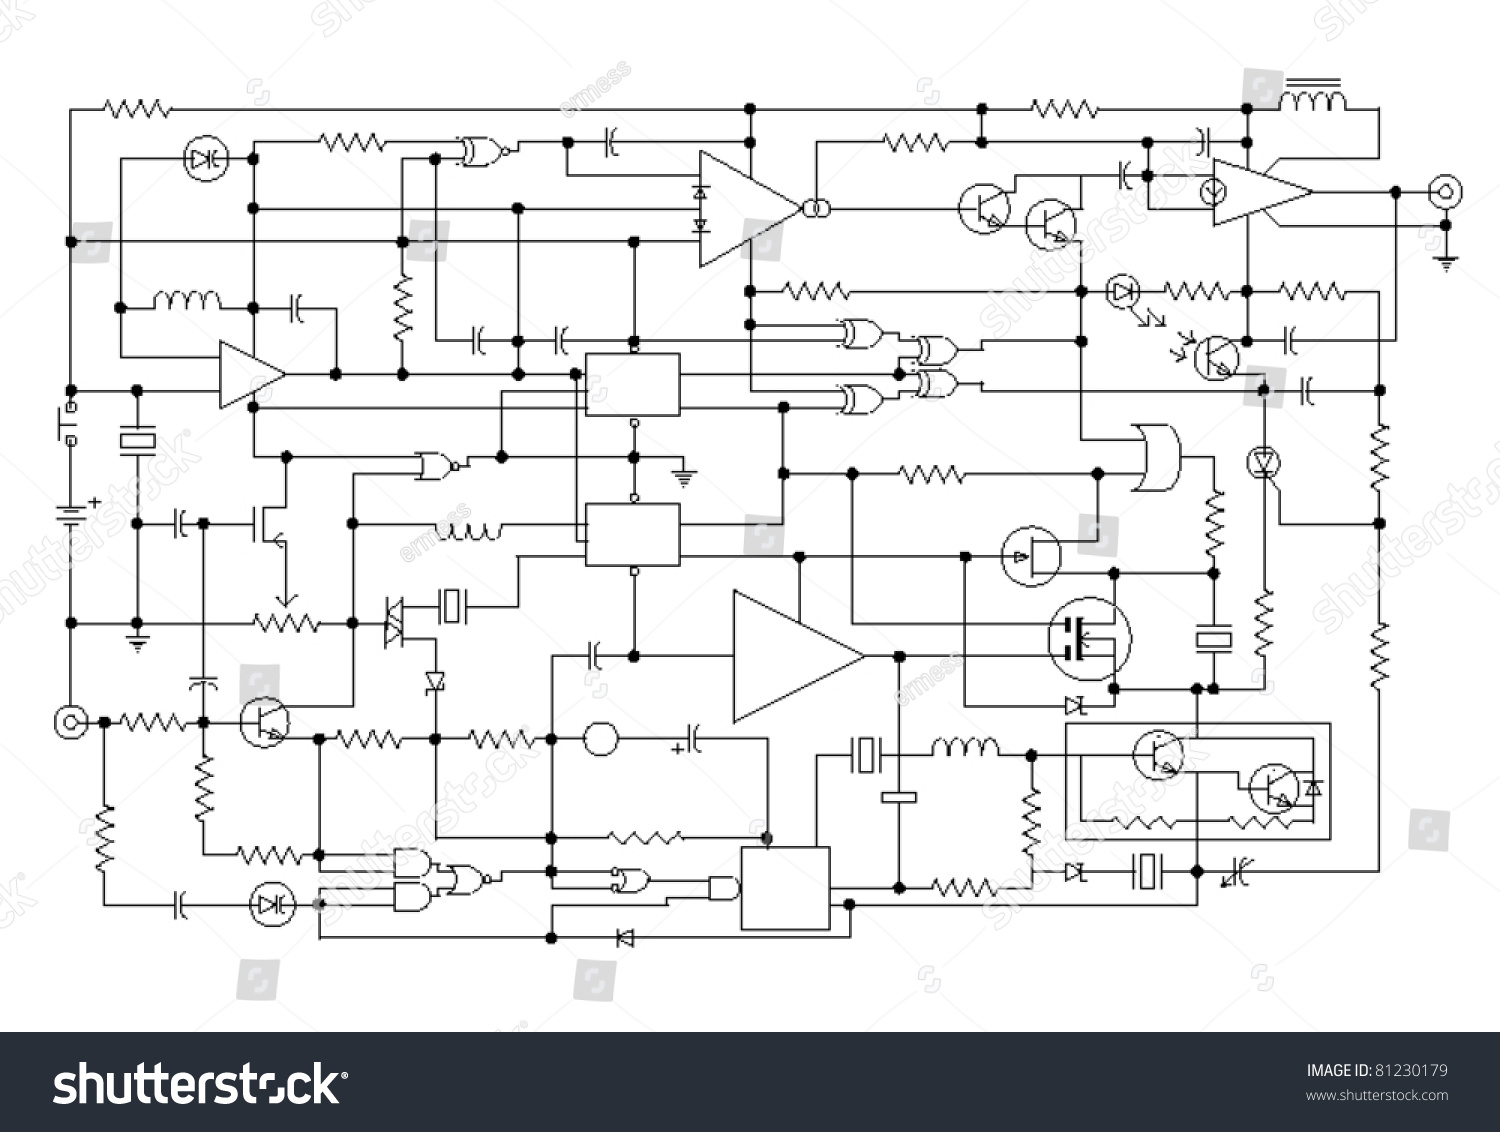 Schematic Diagram Project Electronic Circuit Graphic Stock